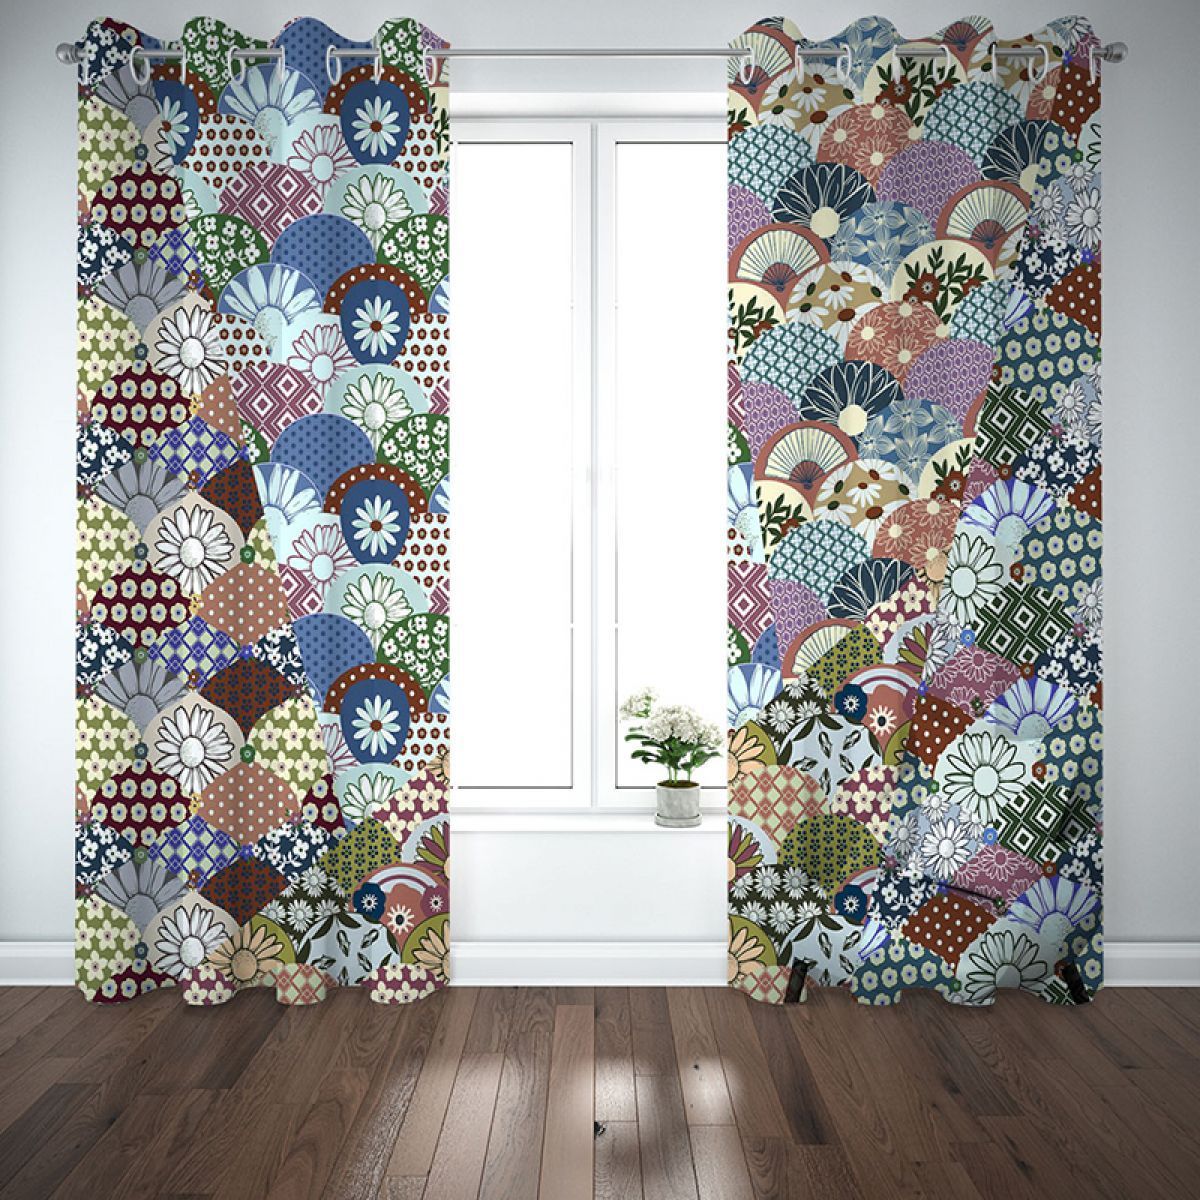 Fans With Floral Design Parlour Printed Window Curtain Home Decor